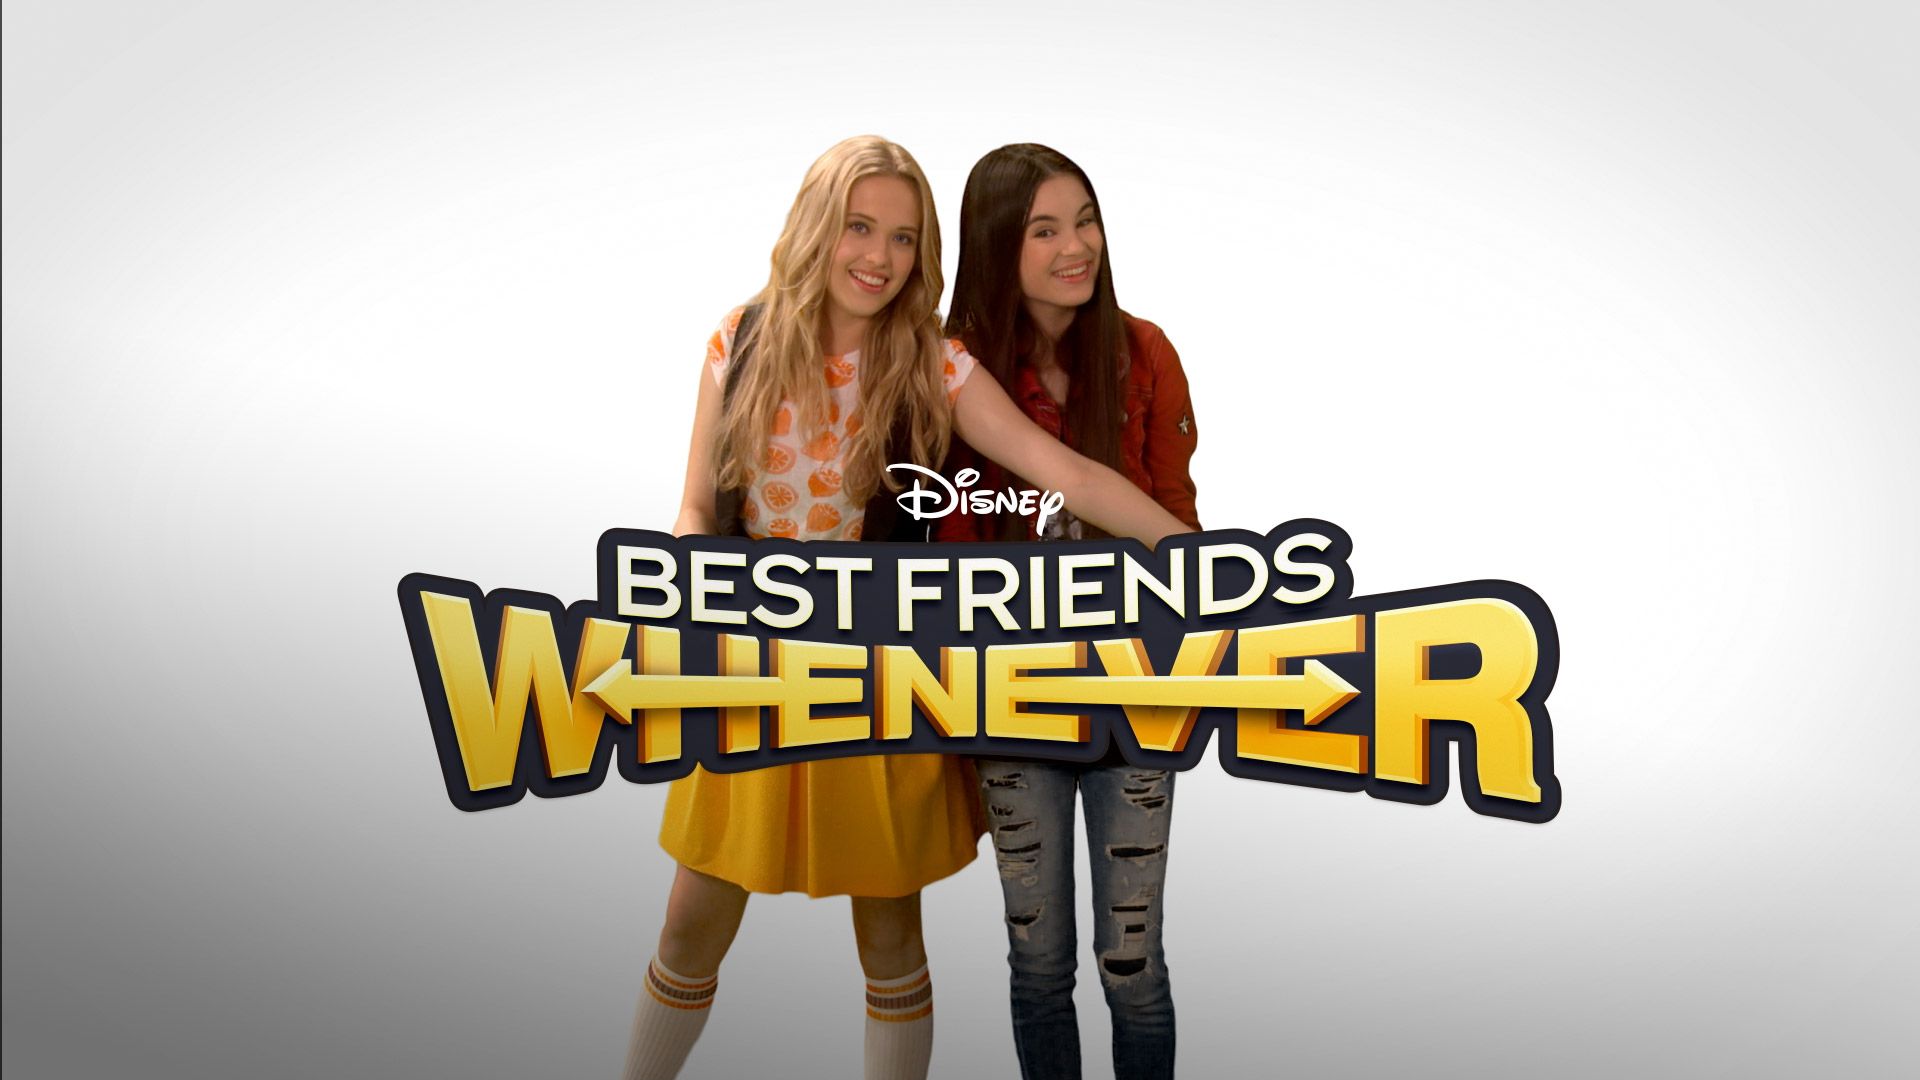 BEST FRIENDS WHENEVER